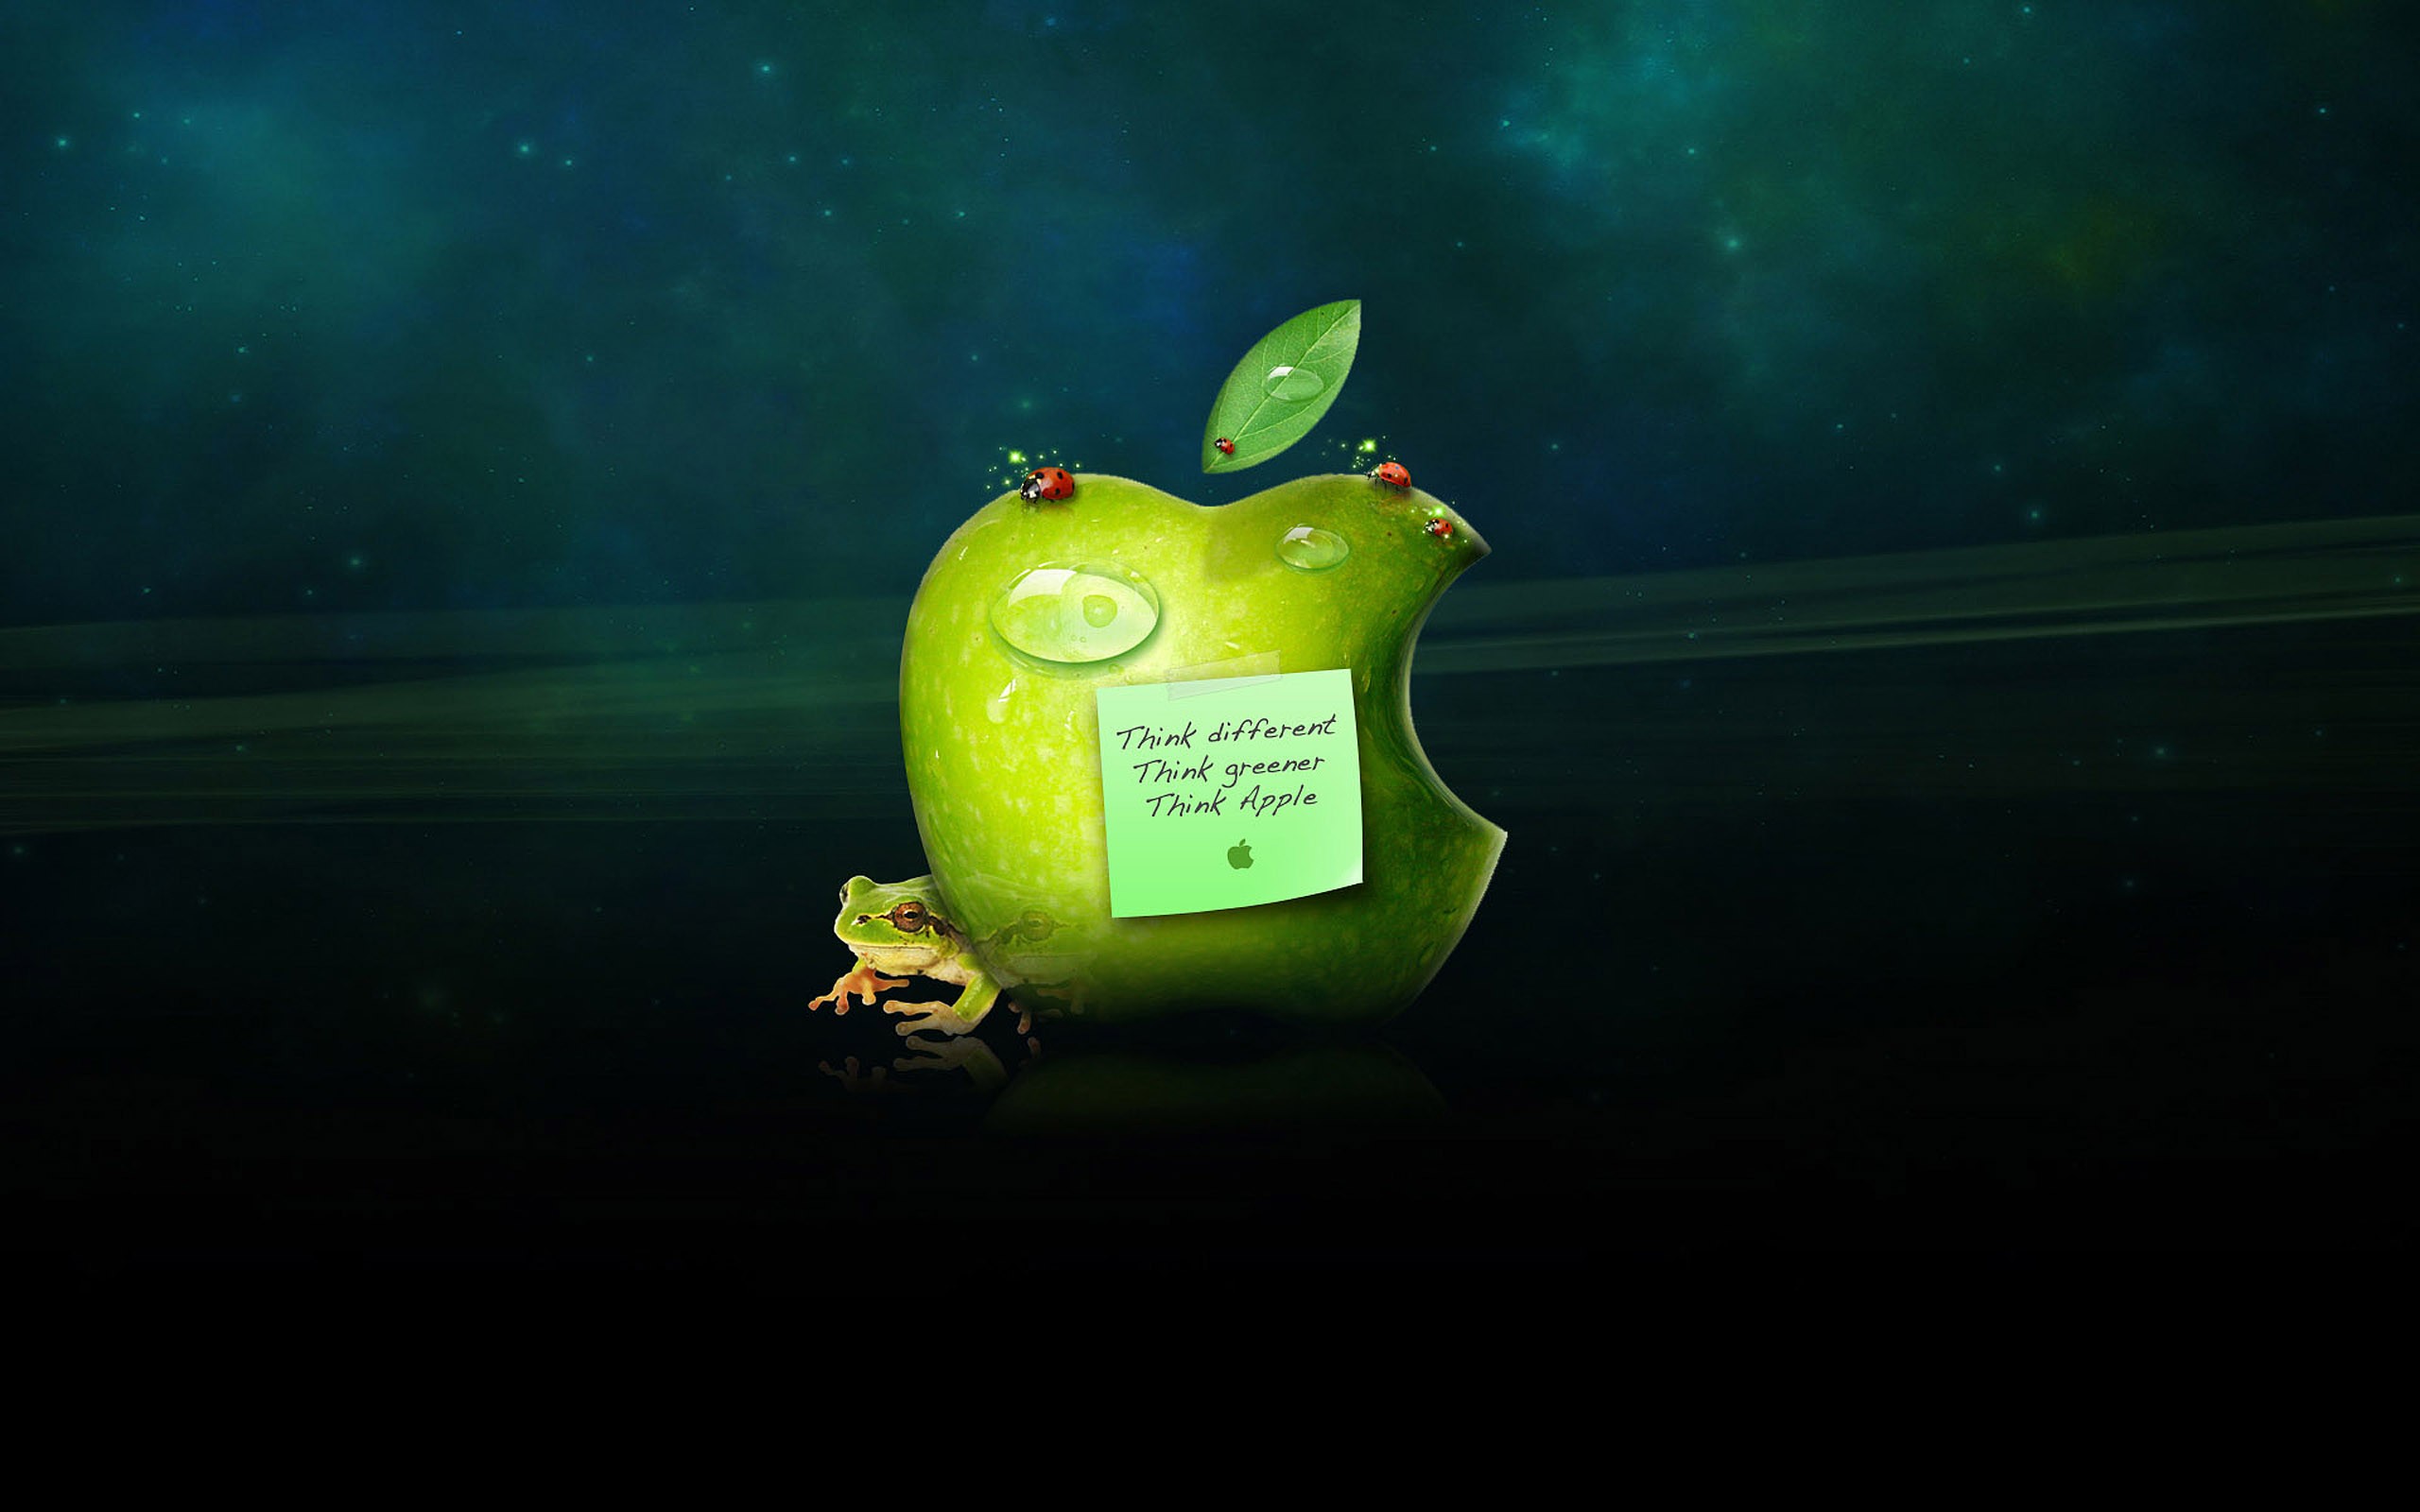 General 2560x1600 humor apples frog ladybugs food fruit animals insect green digital art simple background